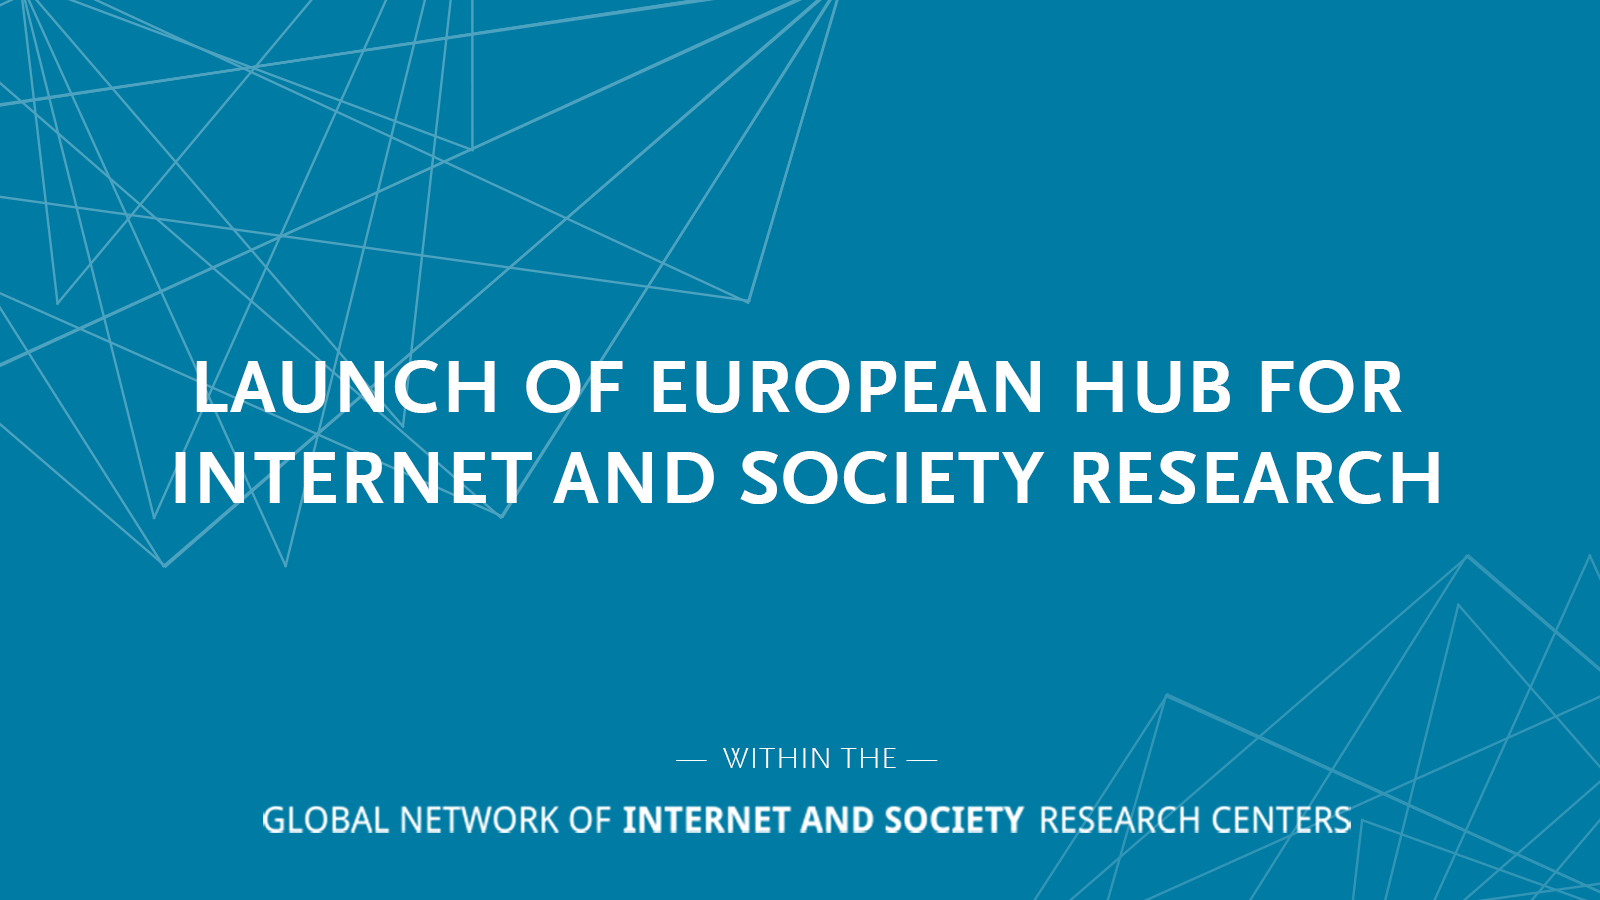 European Hub for Internet and Society launched